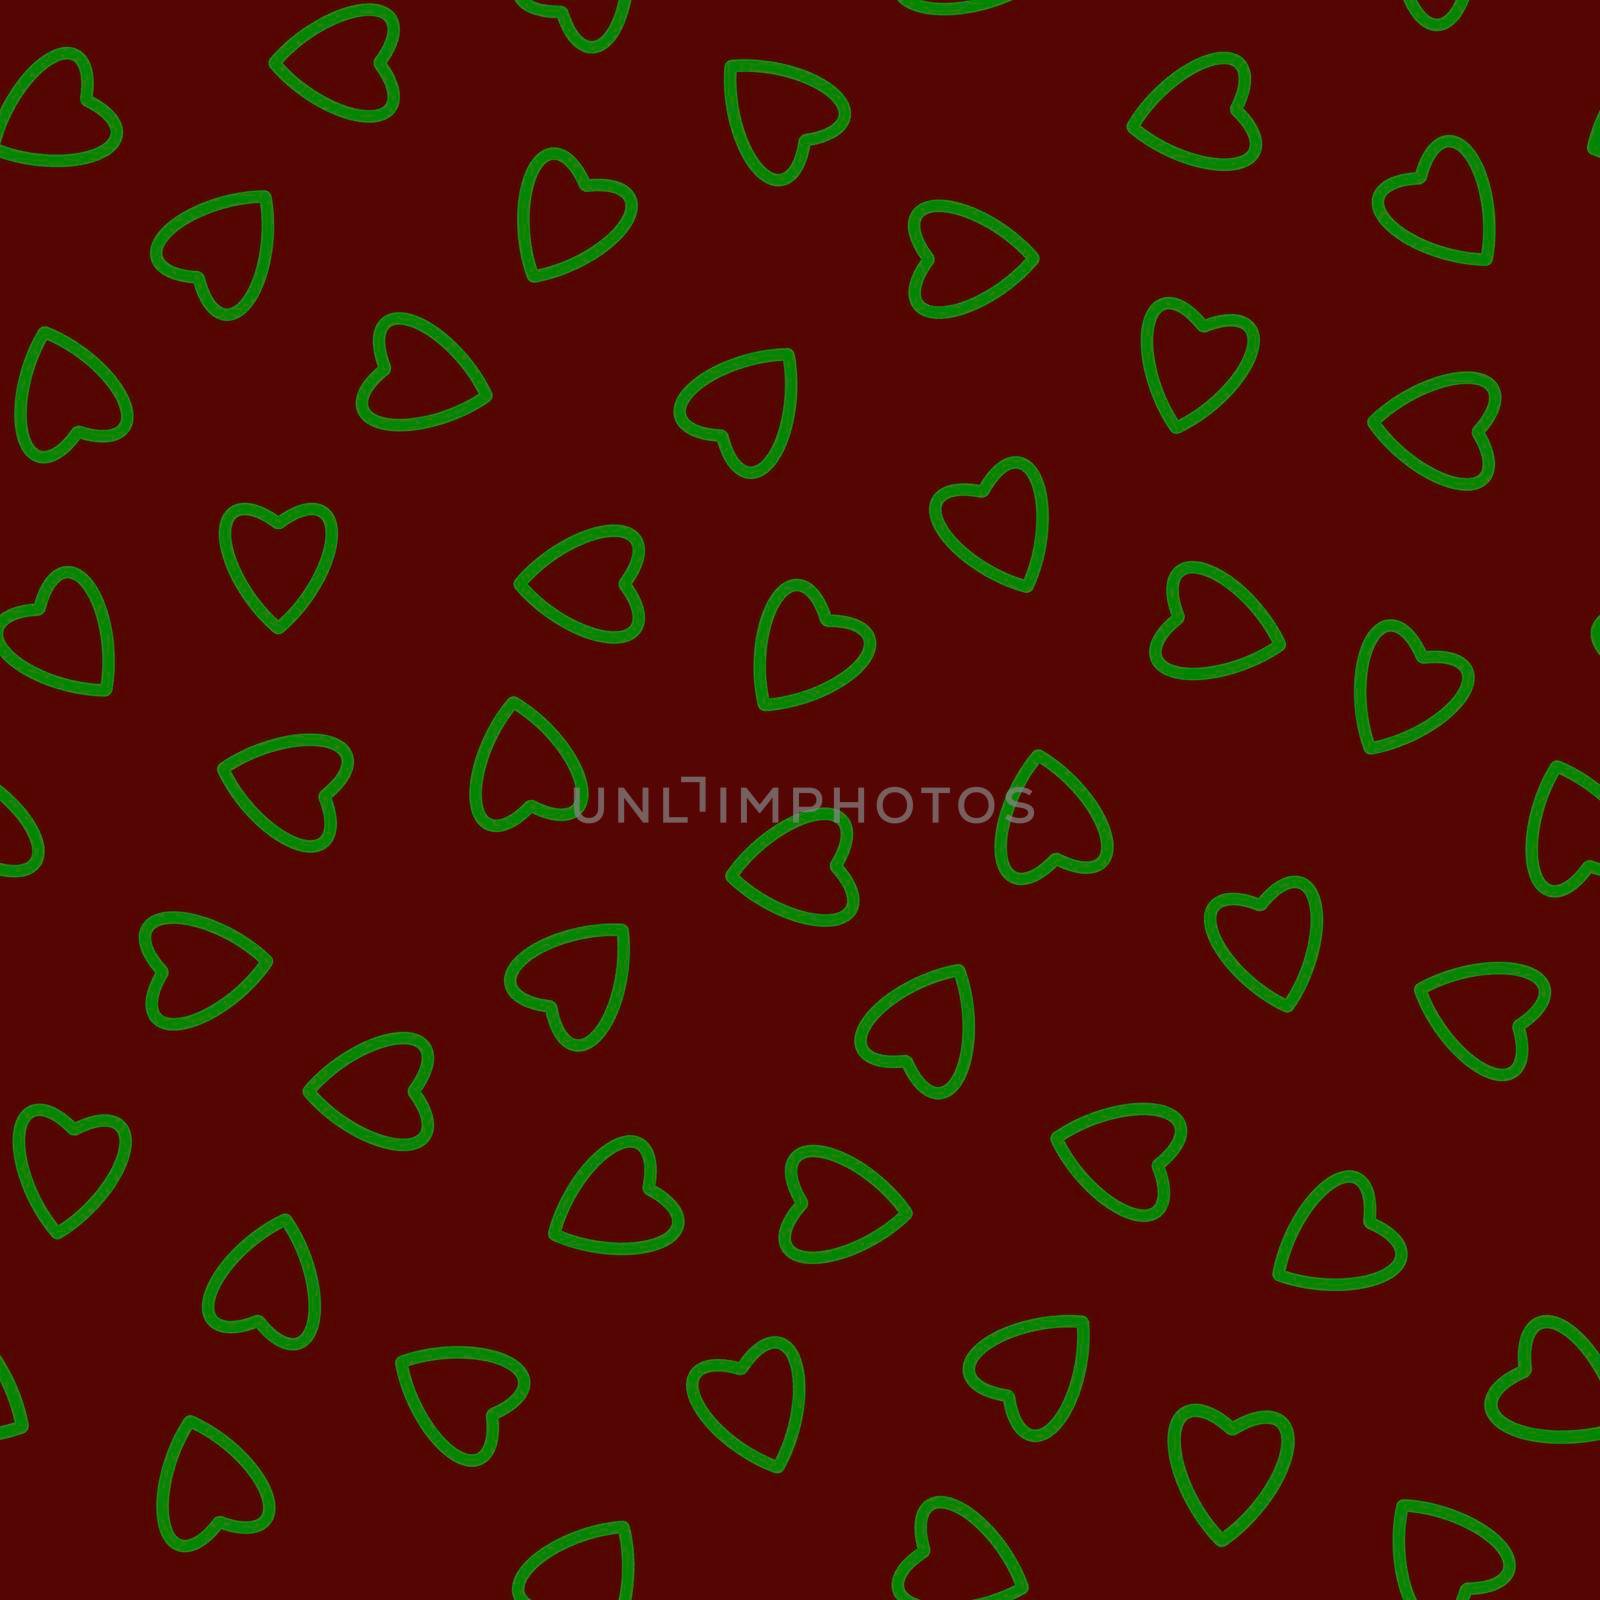 Simple heart seamless pattern,endless chaotic texture made of tiny heart silhouettes.Valentines,mothers day background.Great for Easter,wedding,scrapbook,gift wrapping paper,textiles.Green on burgundy by Angelsmoon